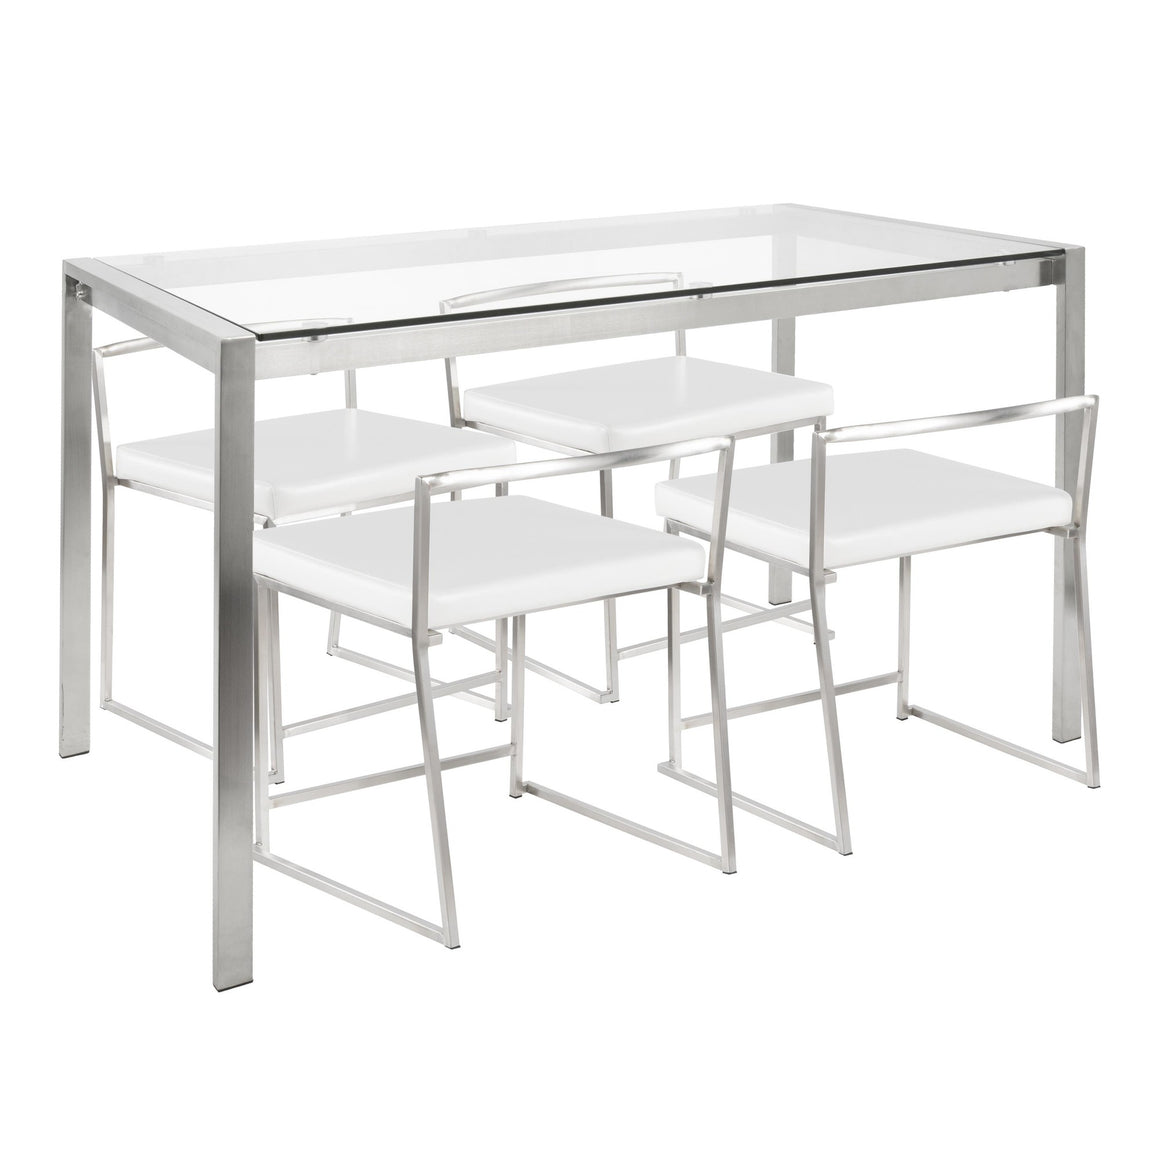 Fuji 5-Piece Contemporary Dining Set in Stainless Steel and White Faux Leather by LumiSource